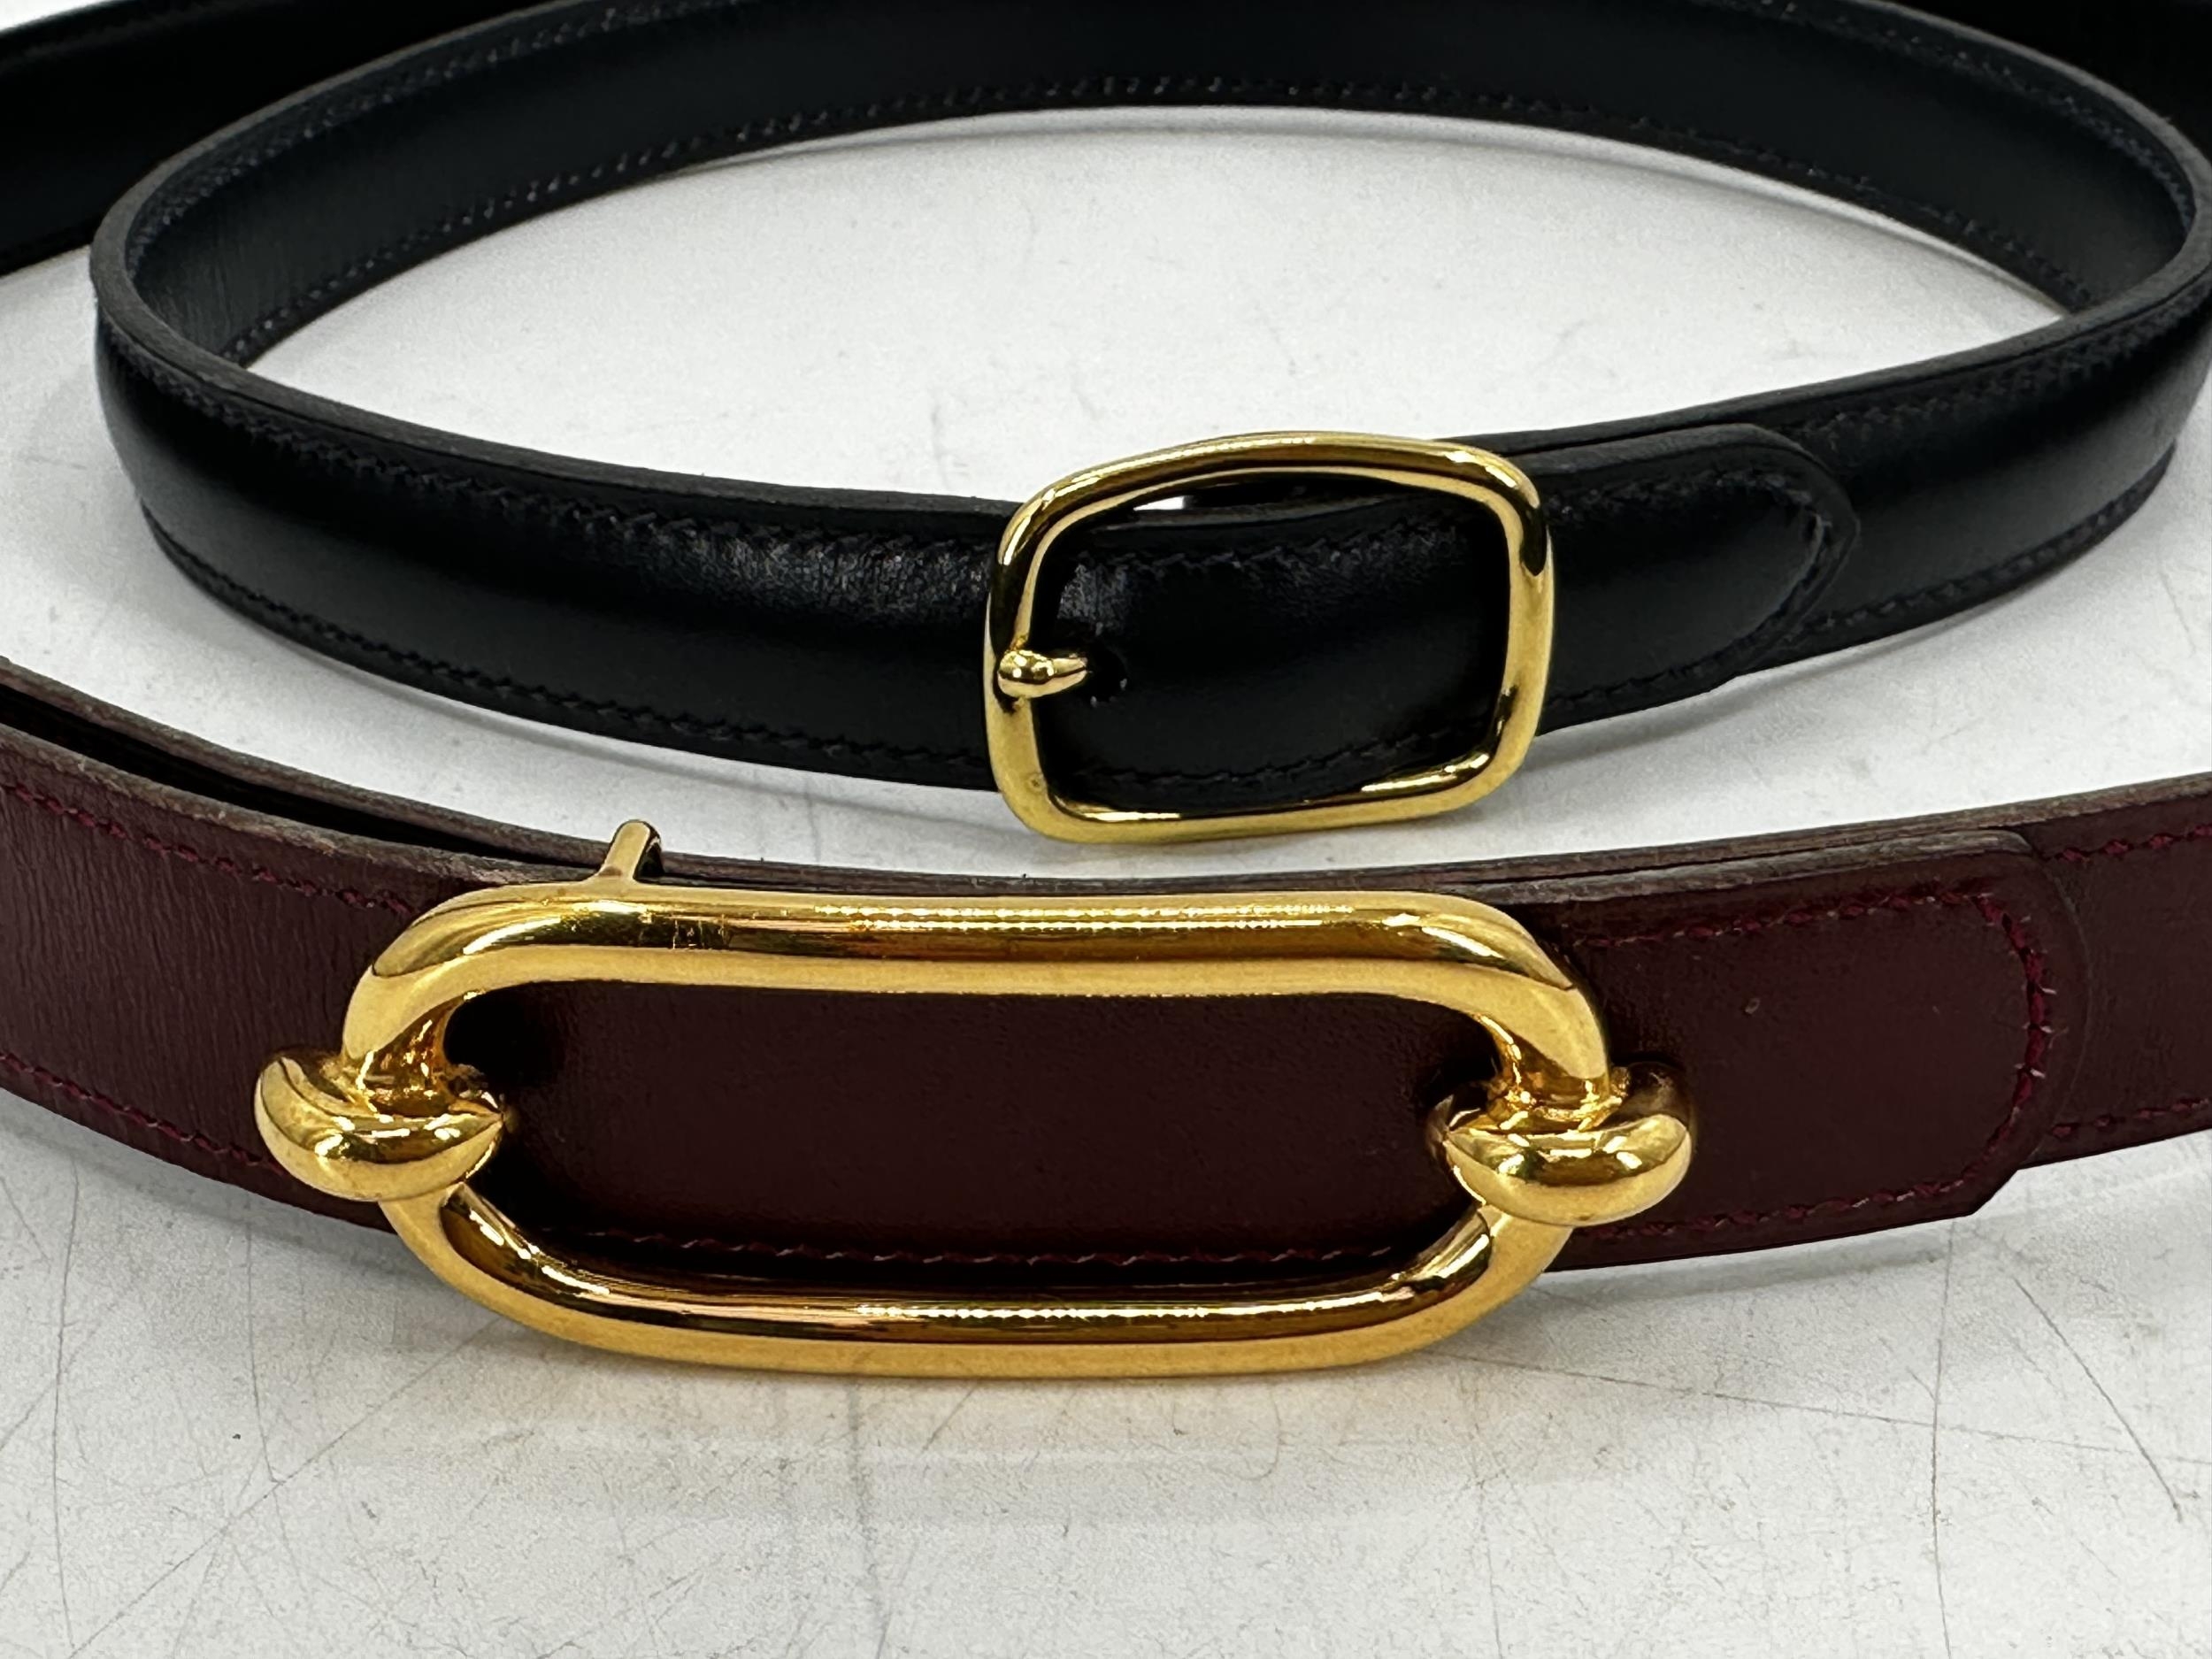 HERMES leather reversible belt, with buckle dust cover and bag, condition good, minor wear; and a - Image 2 of 7